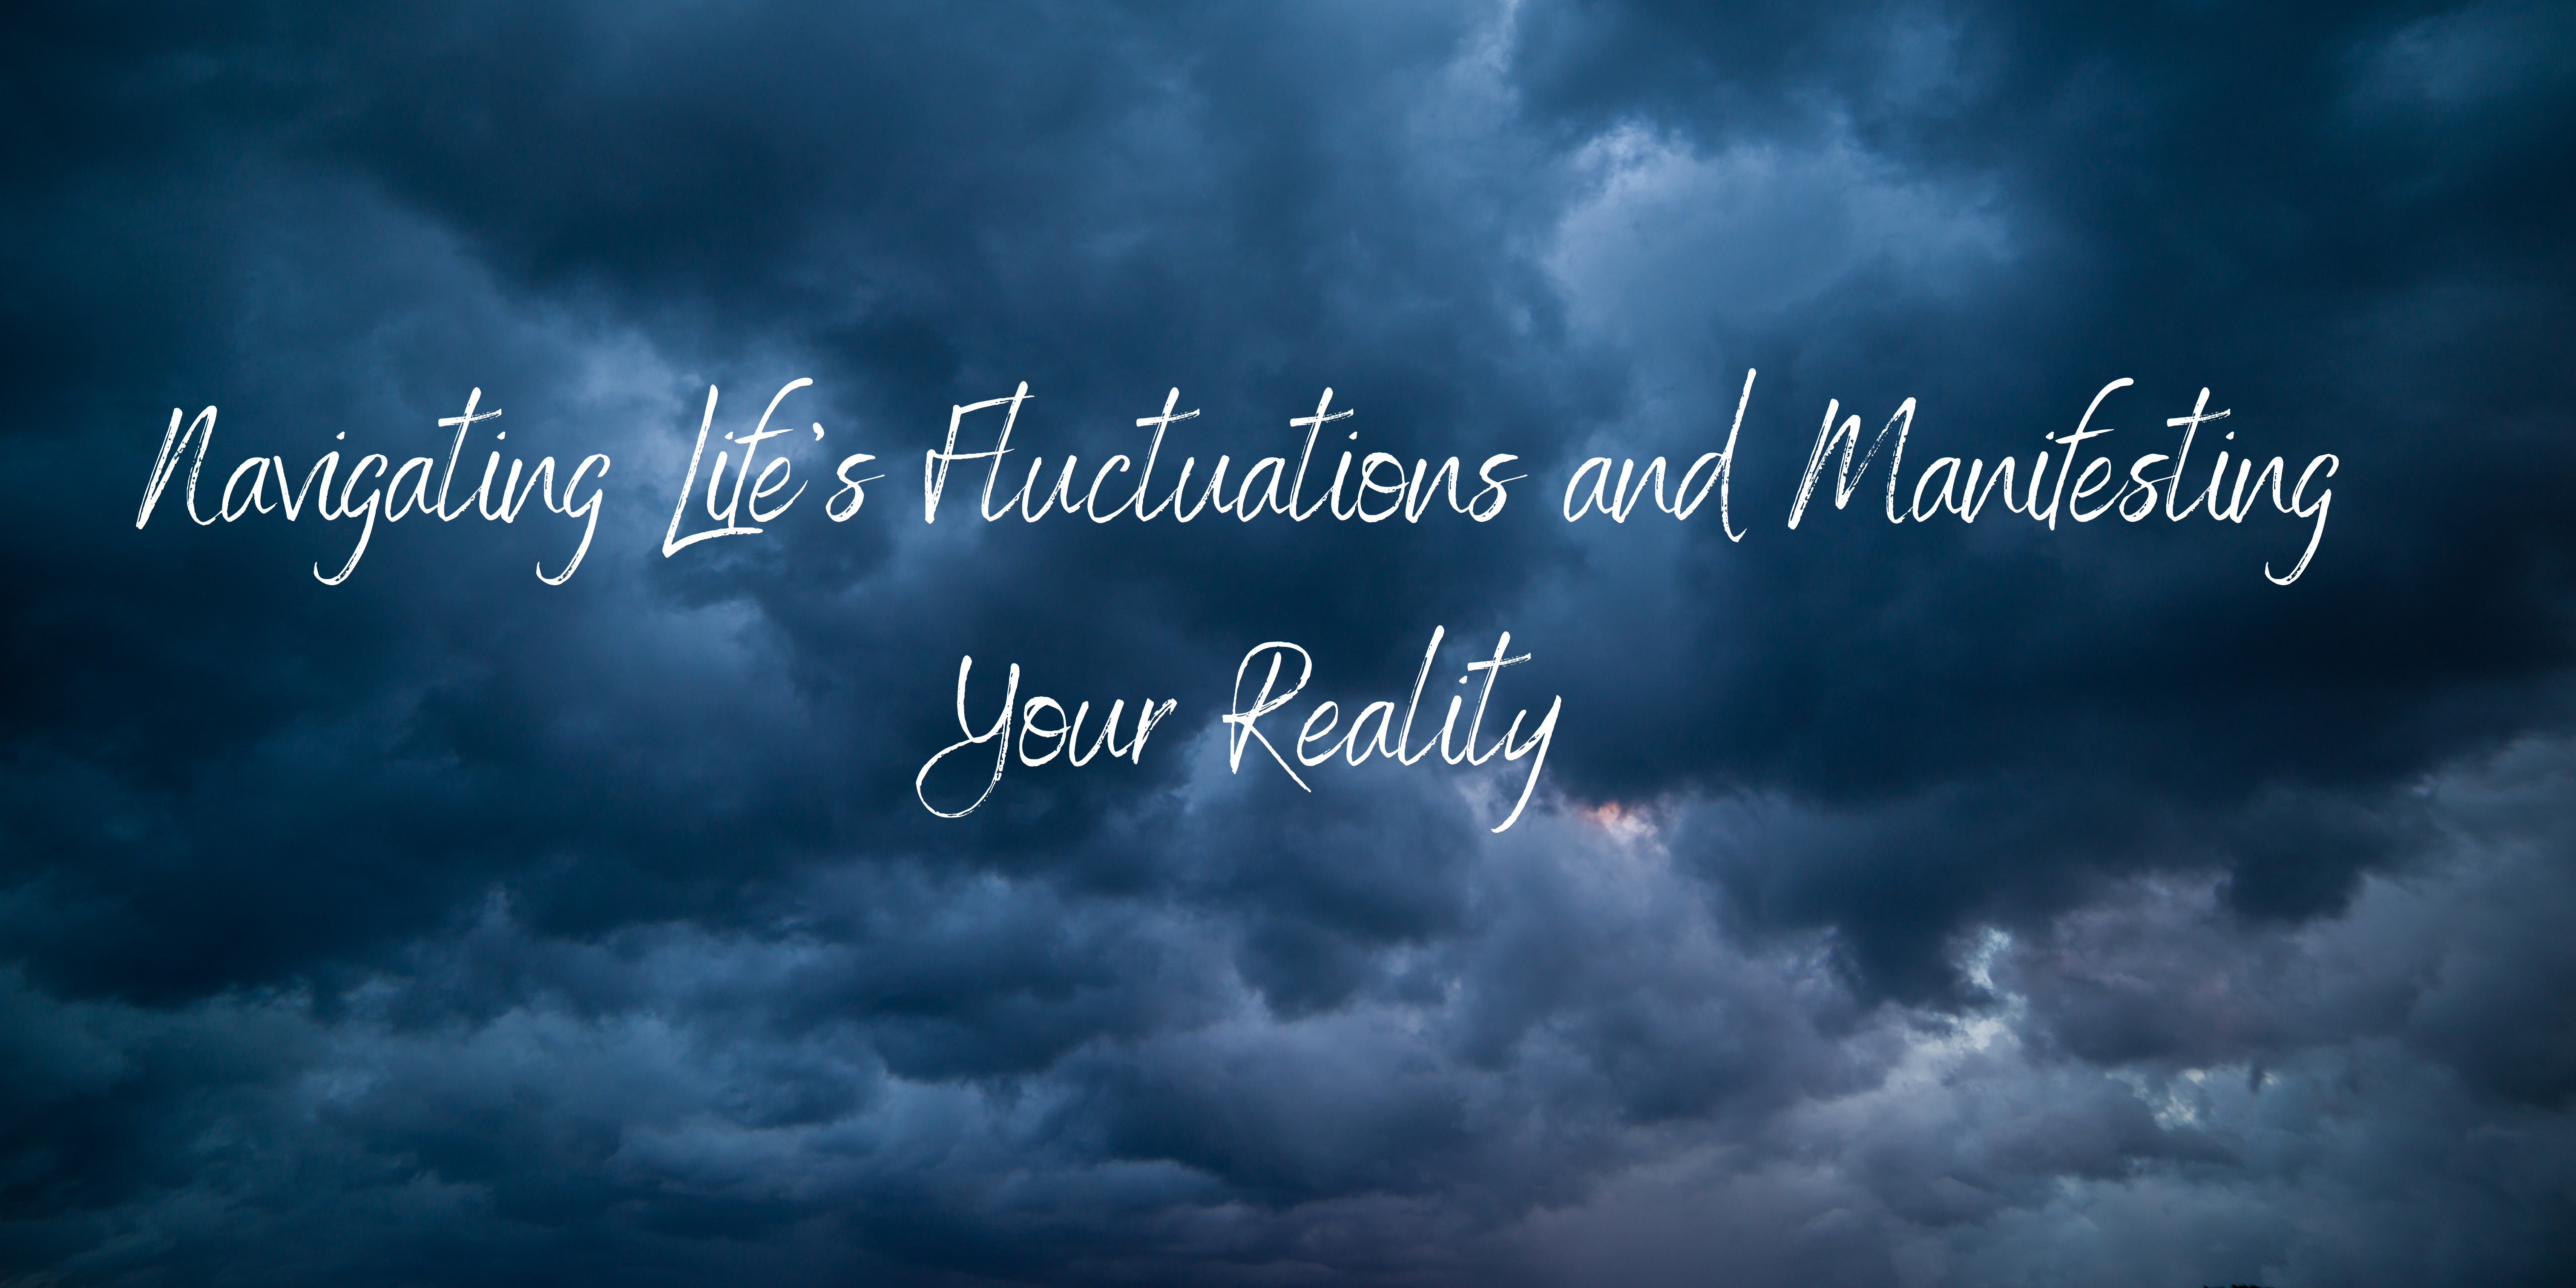 Navigating Life’s Fluctuations and Manifesting Your Reality